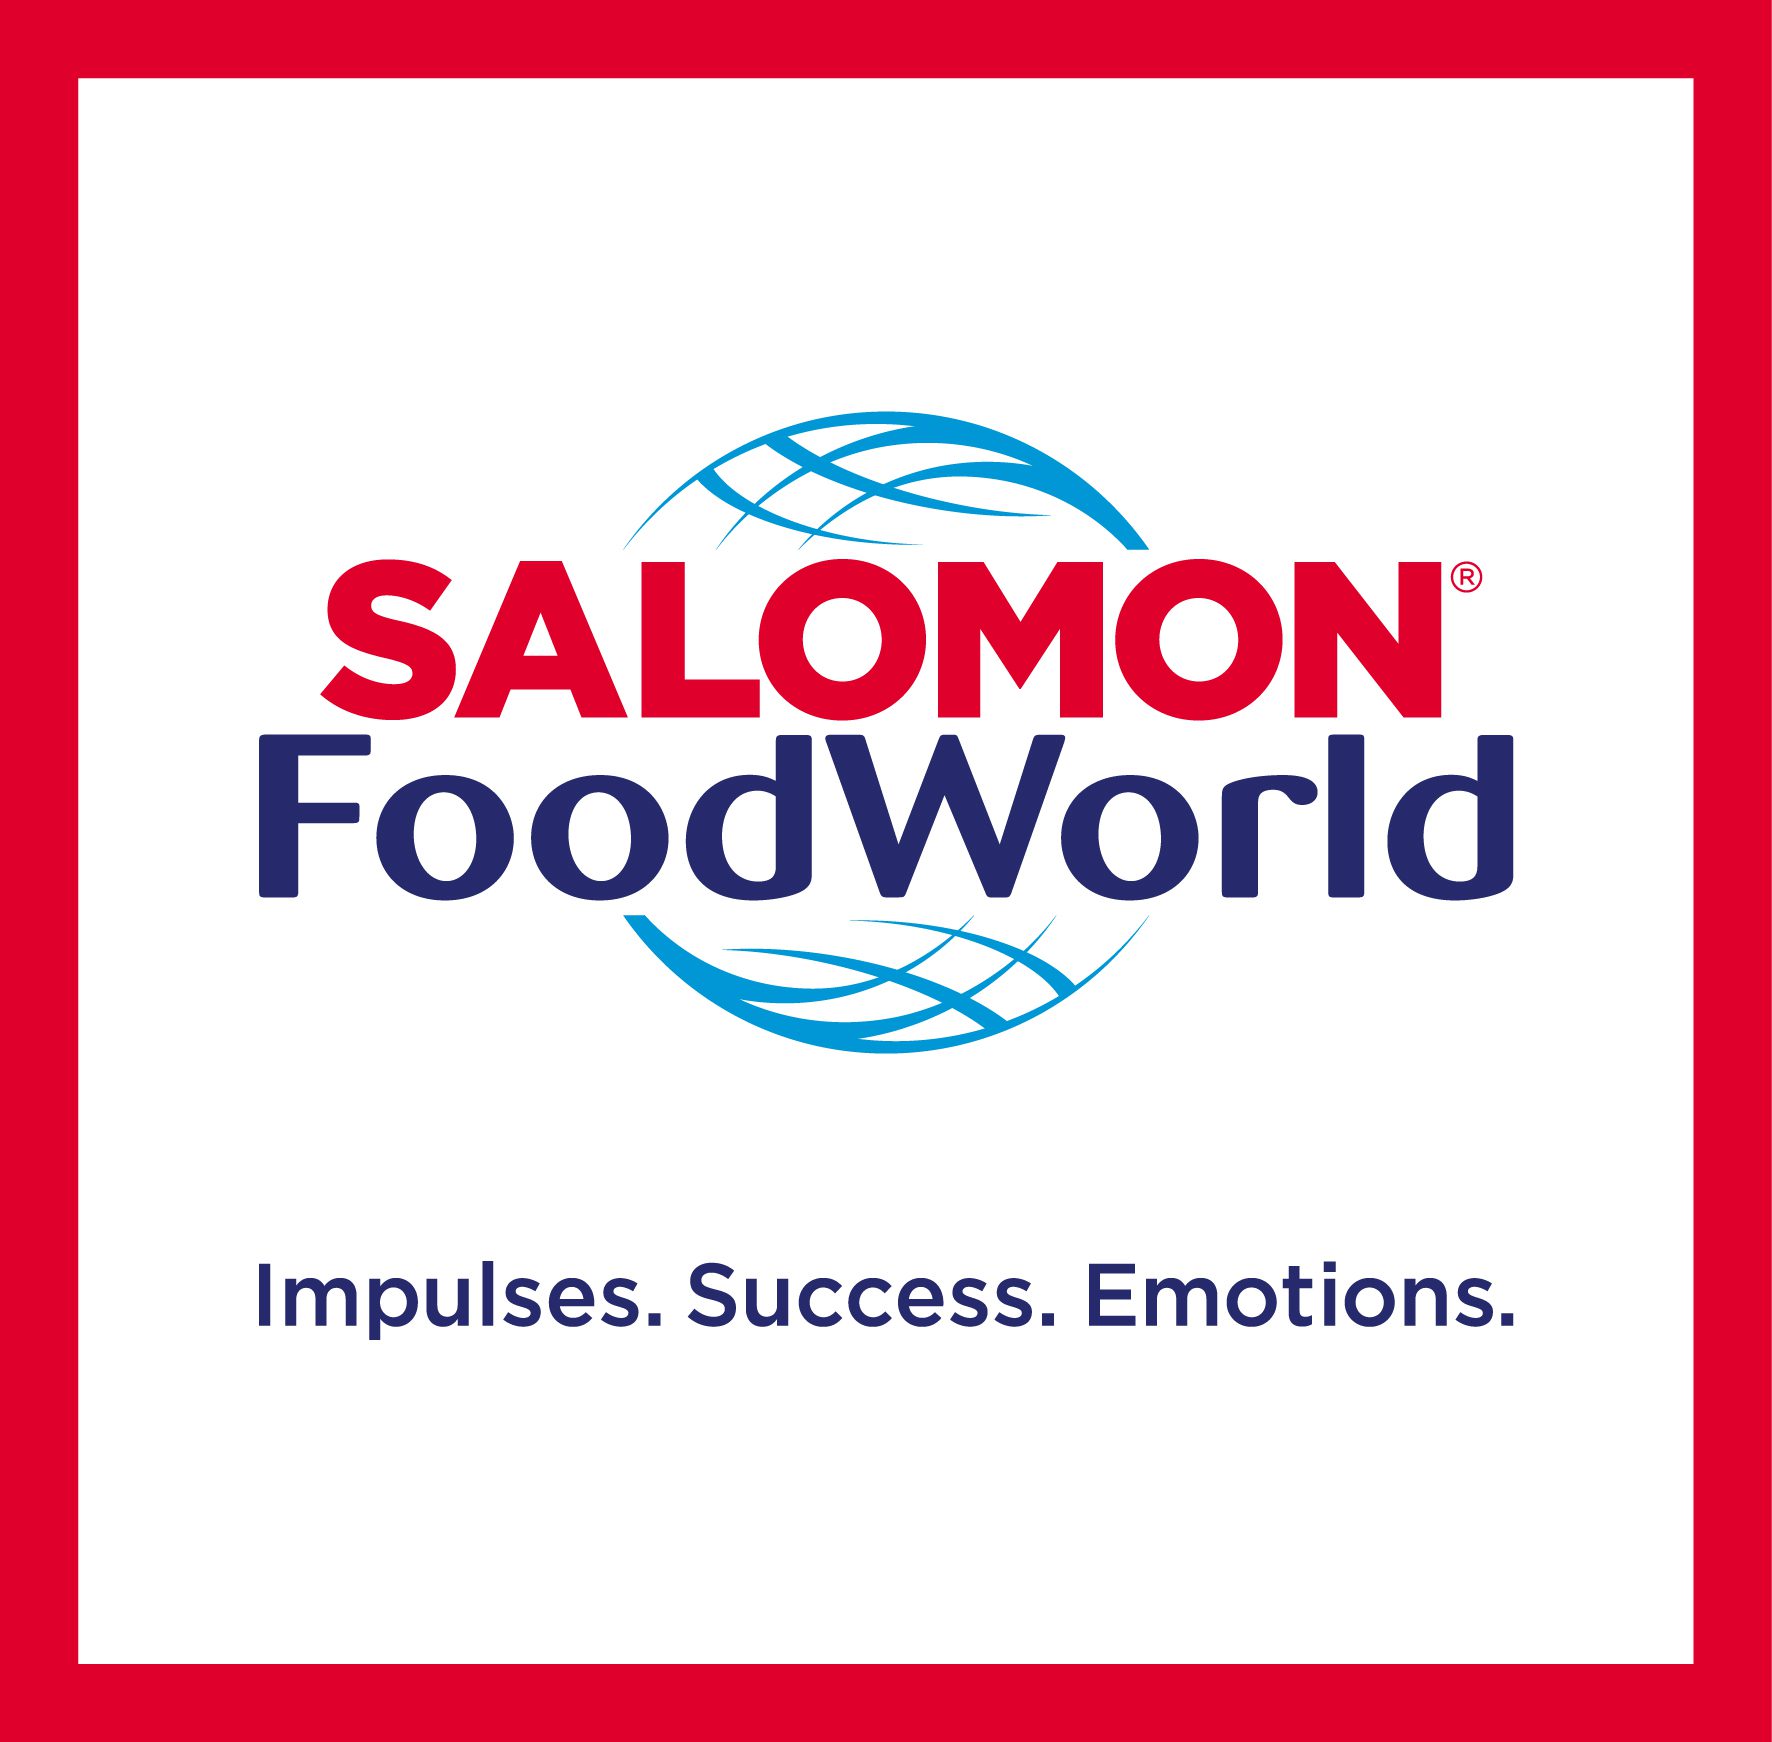 SALOMON FoodWorld, out of home products